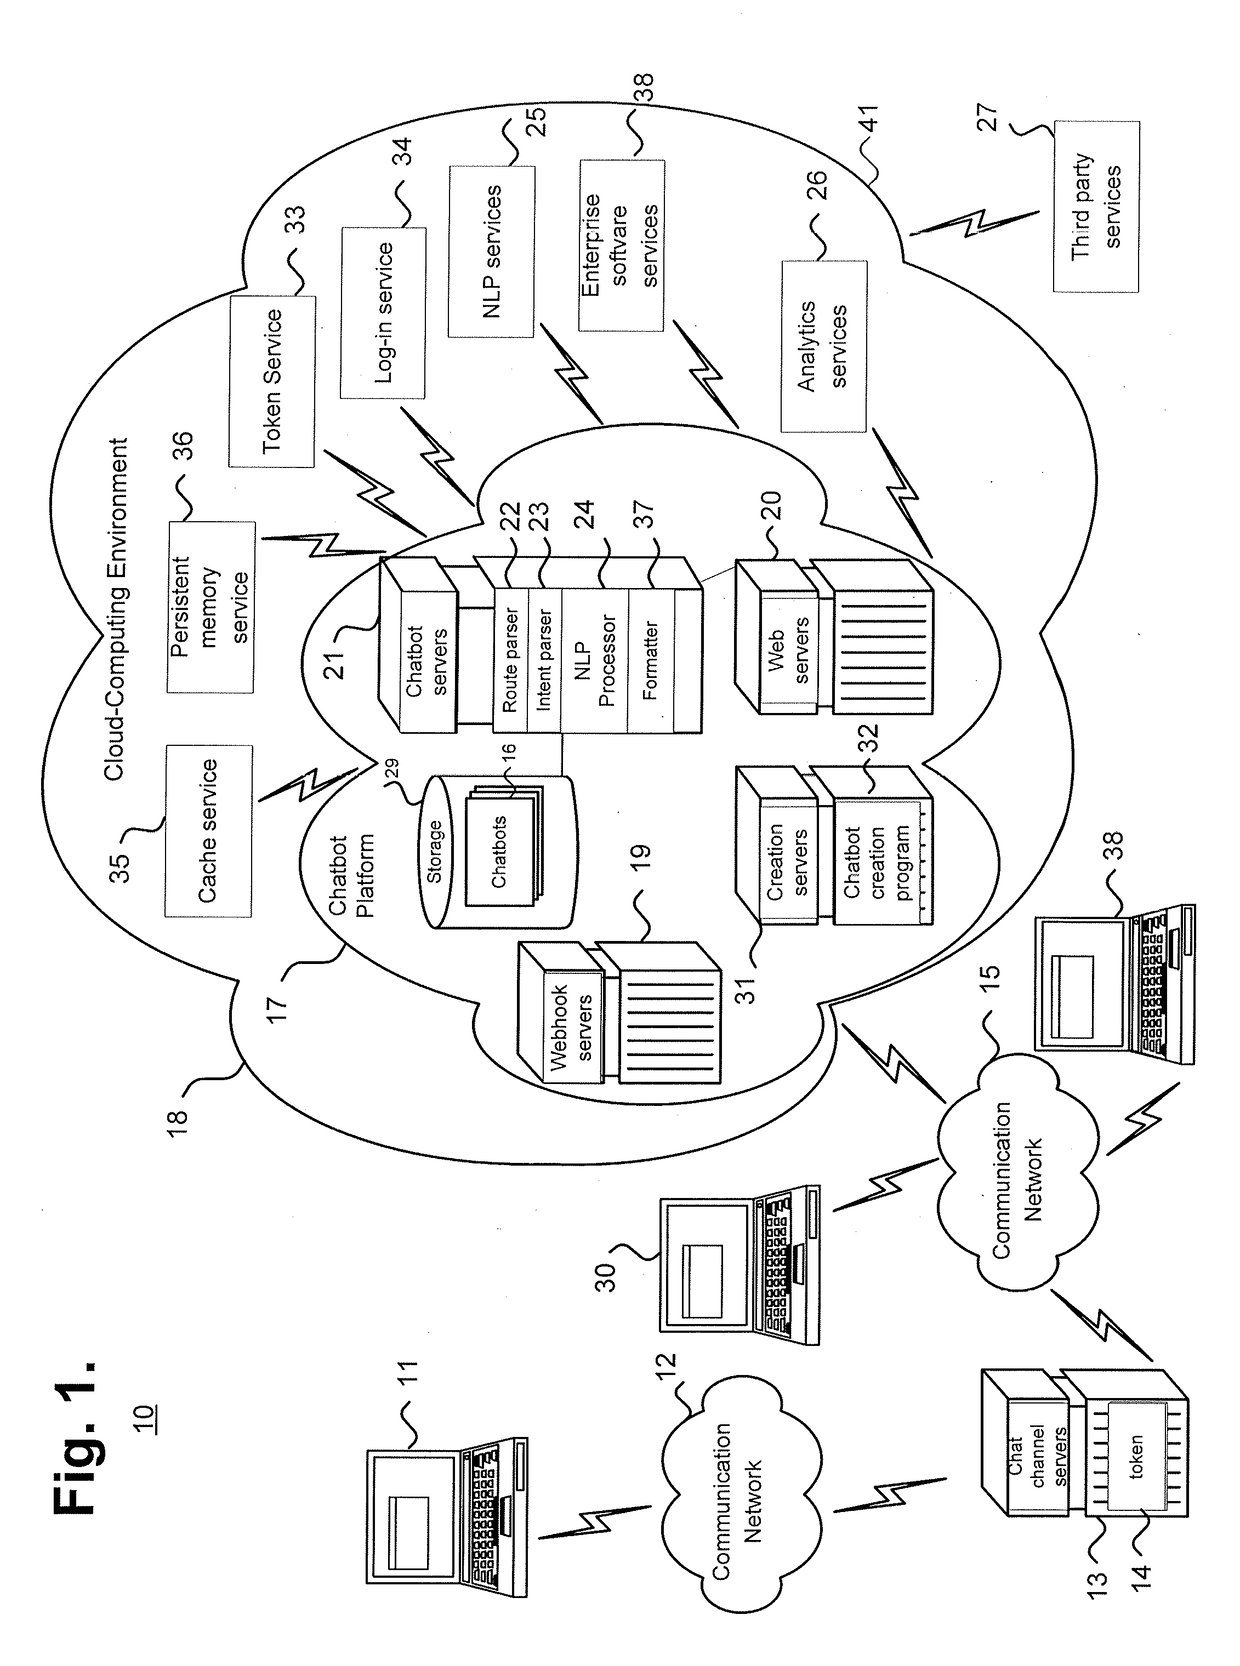 System and Method for Facilitating Computer Generated Conversations with the aid of a Digital Computer